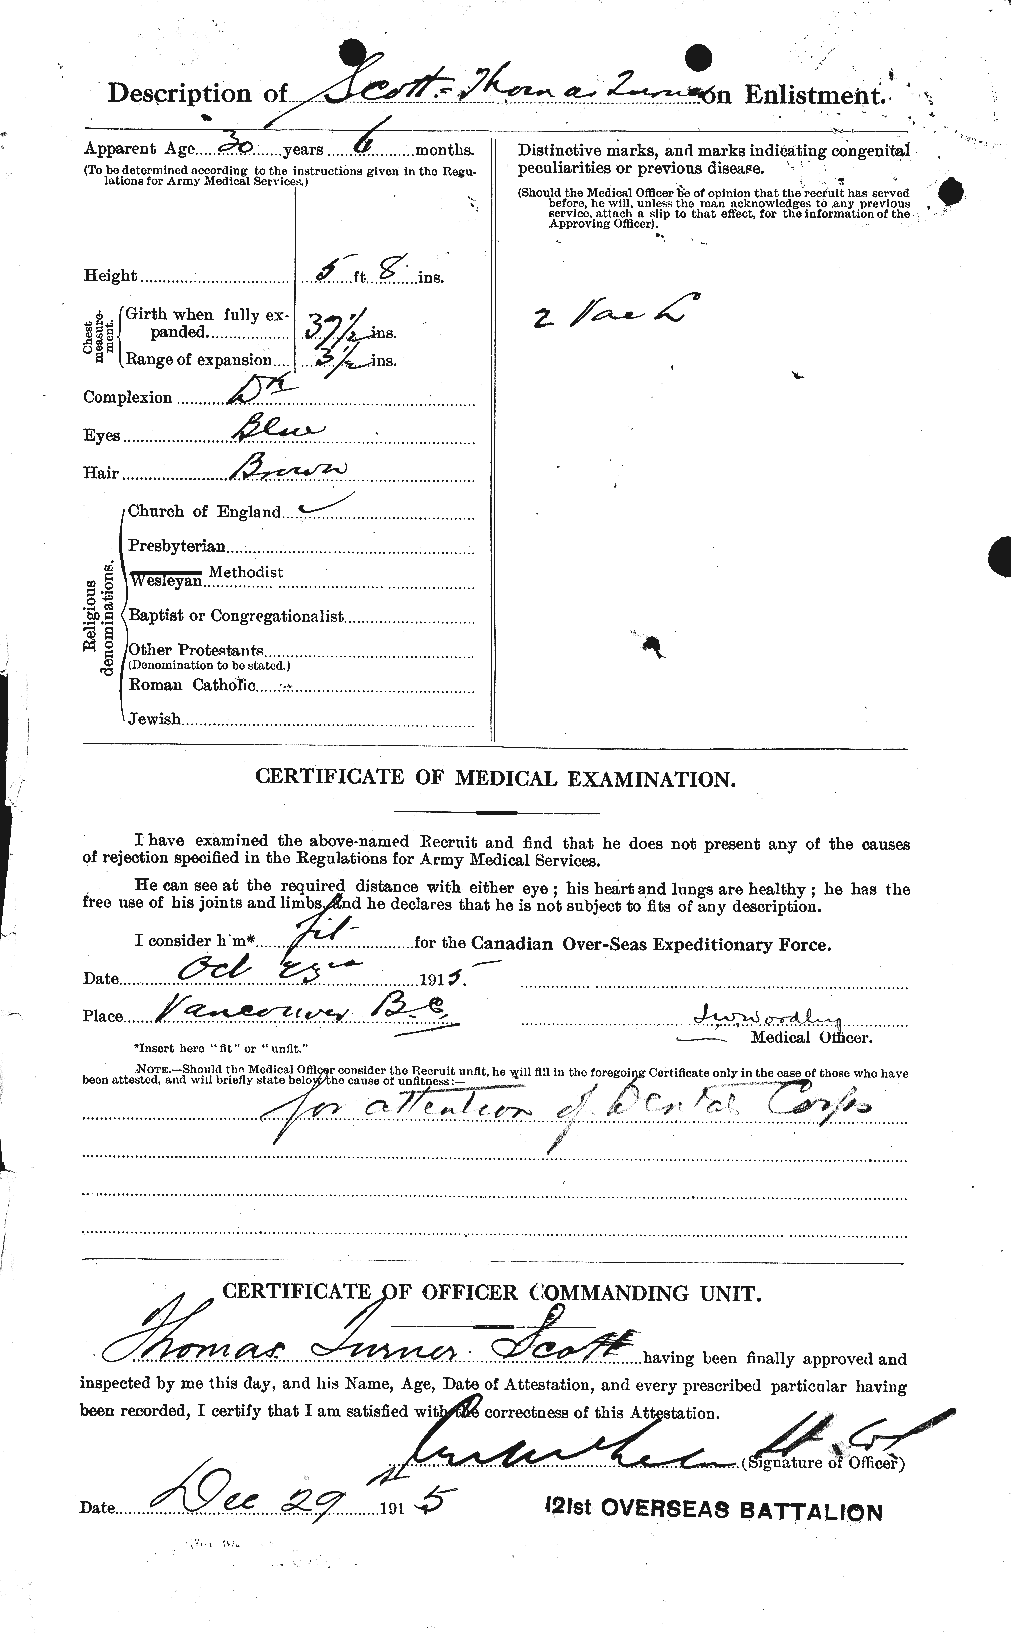 Personnel Records of the First World War - CEF 088219b